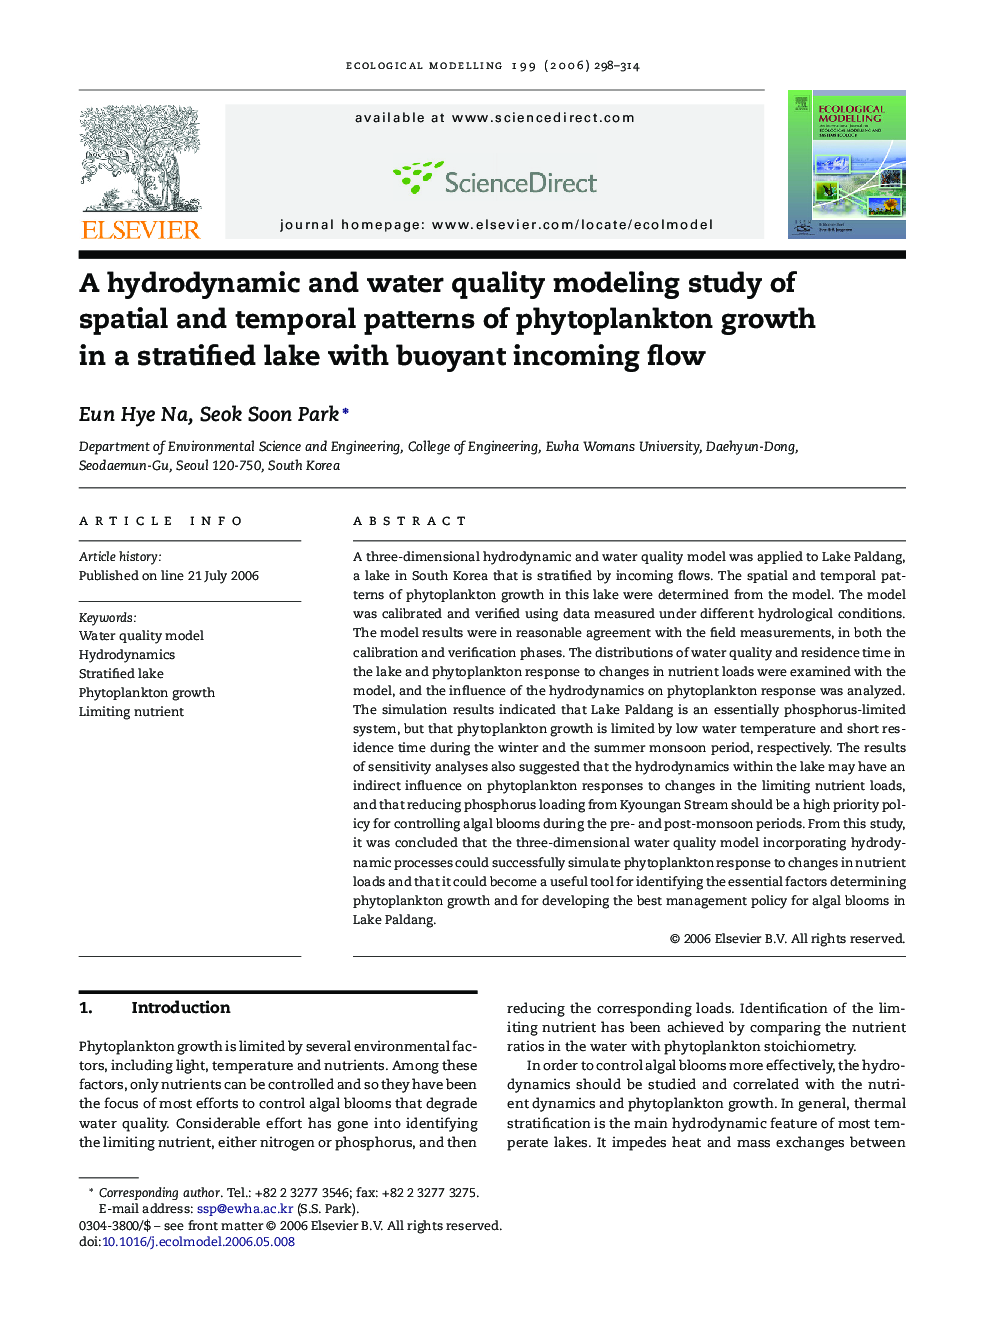 A hydrodynamic and water quality modeling study of spatial and temporal patterns of phytoplankton growth in a stratified lake with buoyant incoming flow